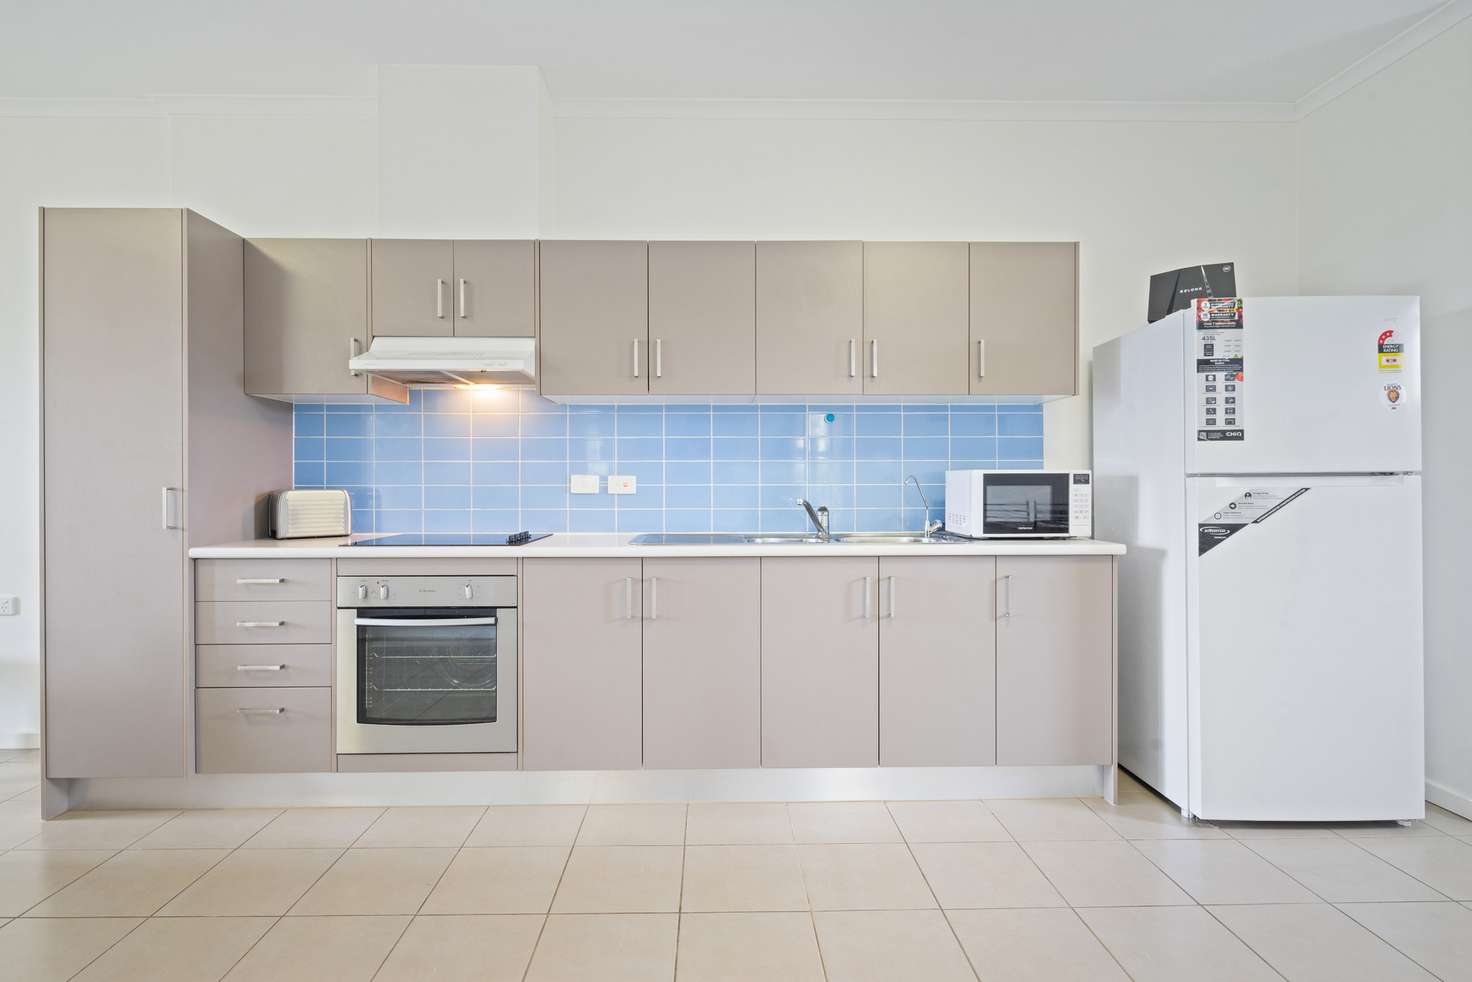 Main view of Homely unit listing, 7/2 Grey Box Avenue, Noarlunga Centre SA 5168